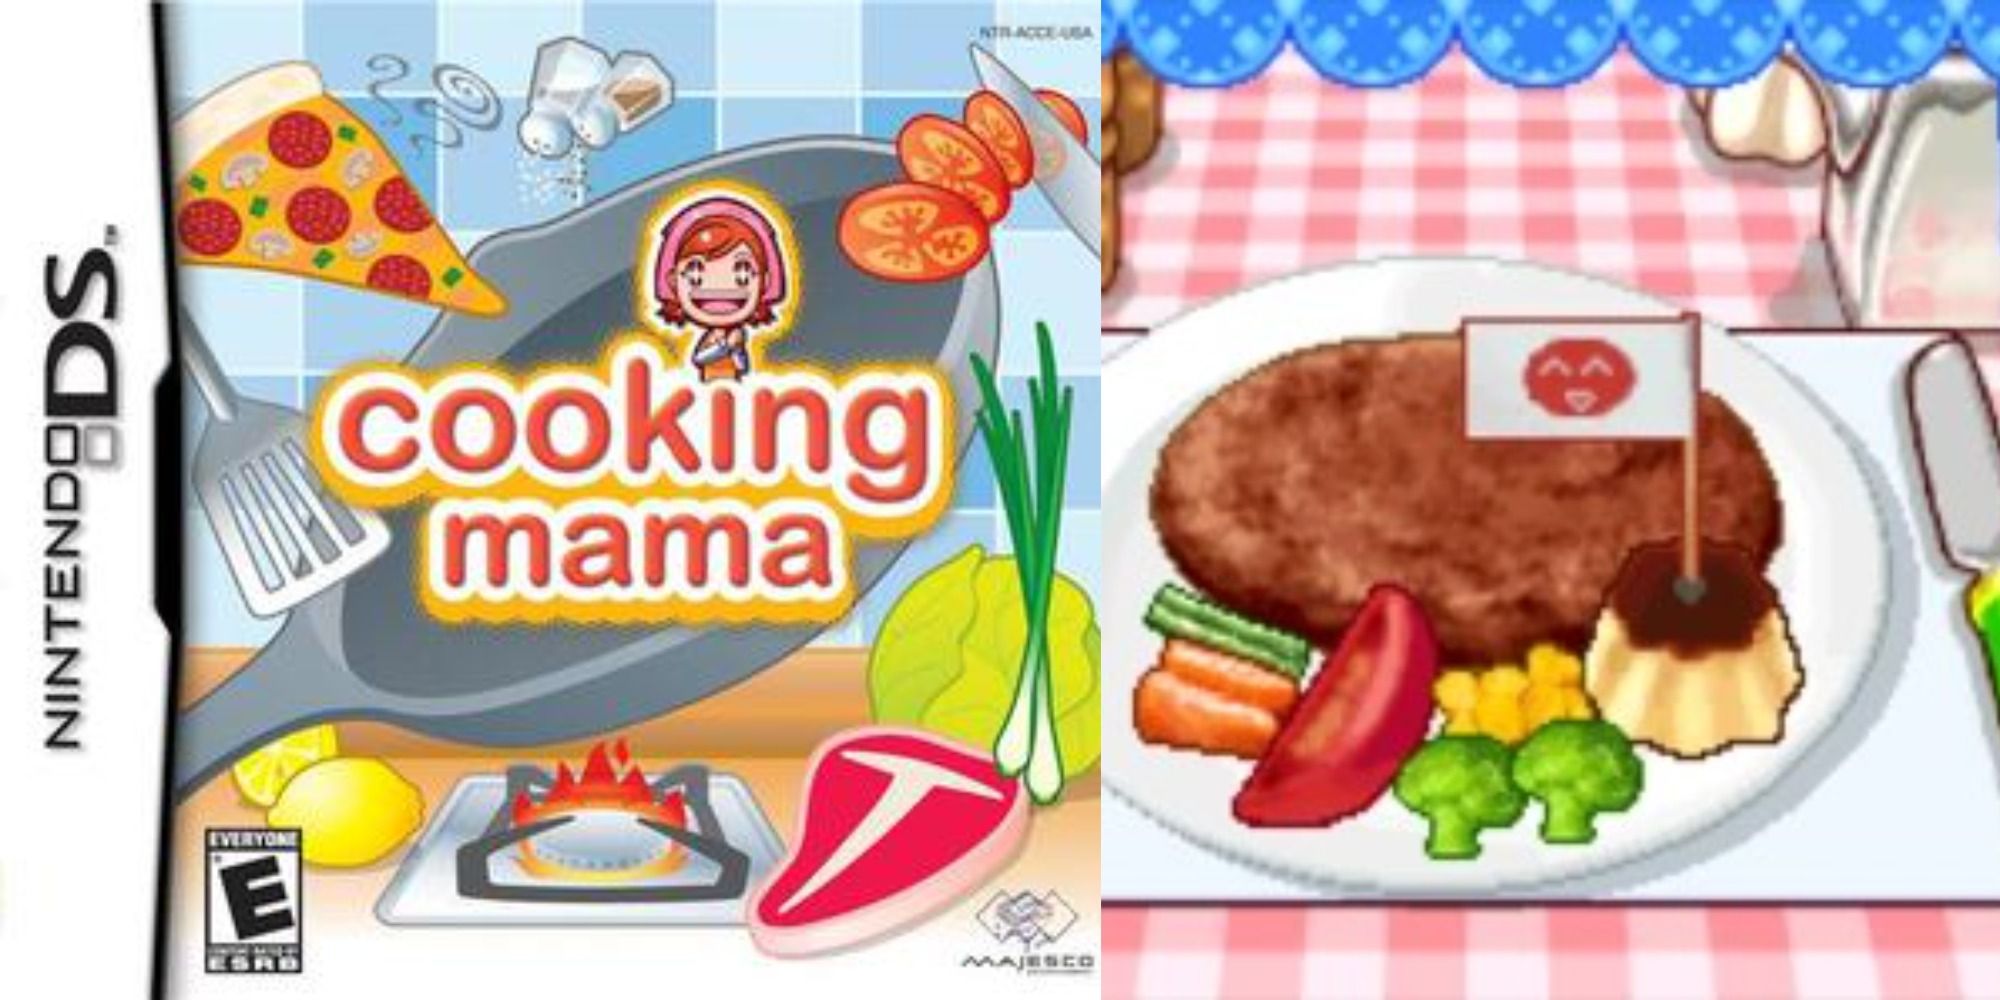 DS Games Cooking Mama cover and game